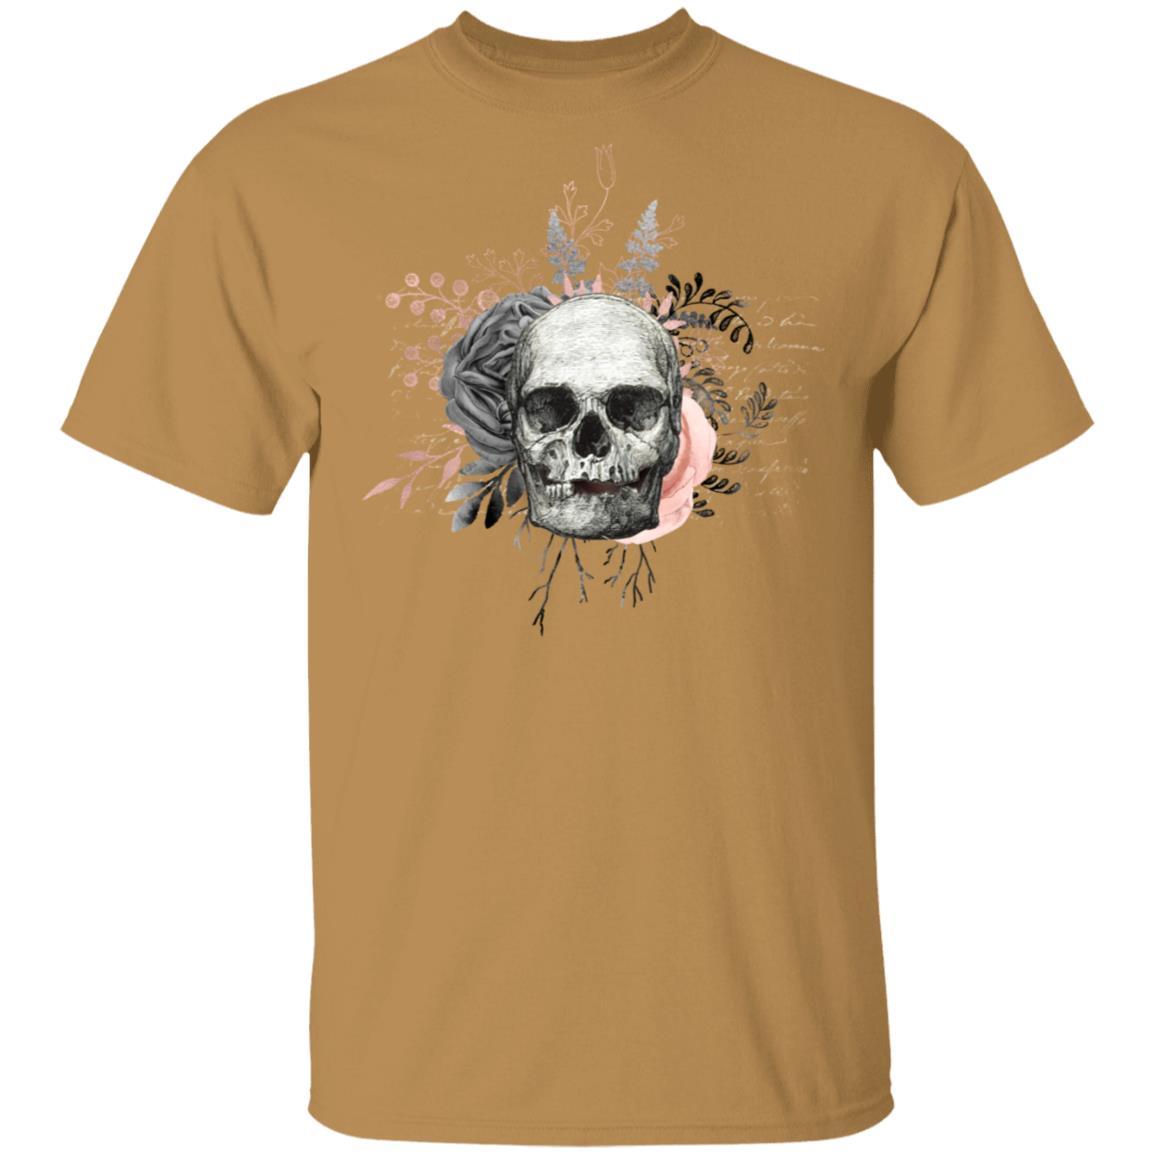 T-Shirts Old Gold / S Winey Bitches Co Skull Design #4 5.3 oz. T-Shirt WineyBitchesCo